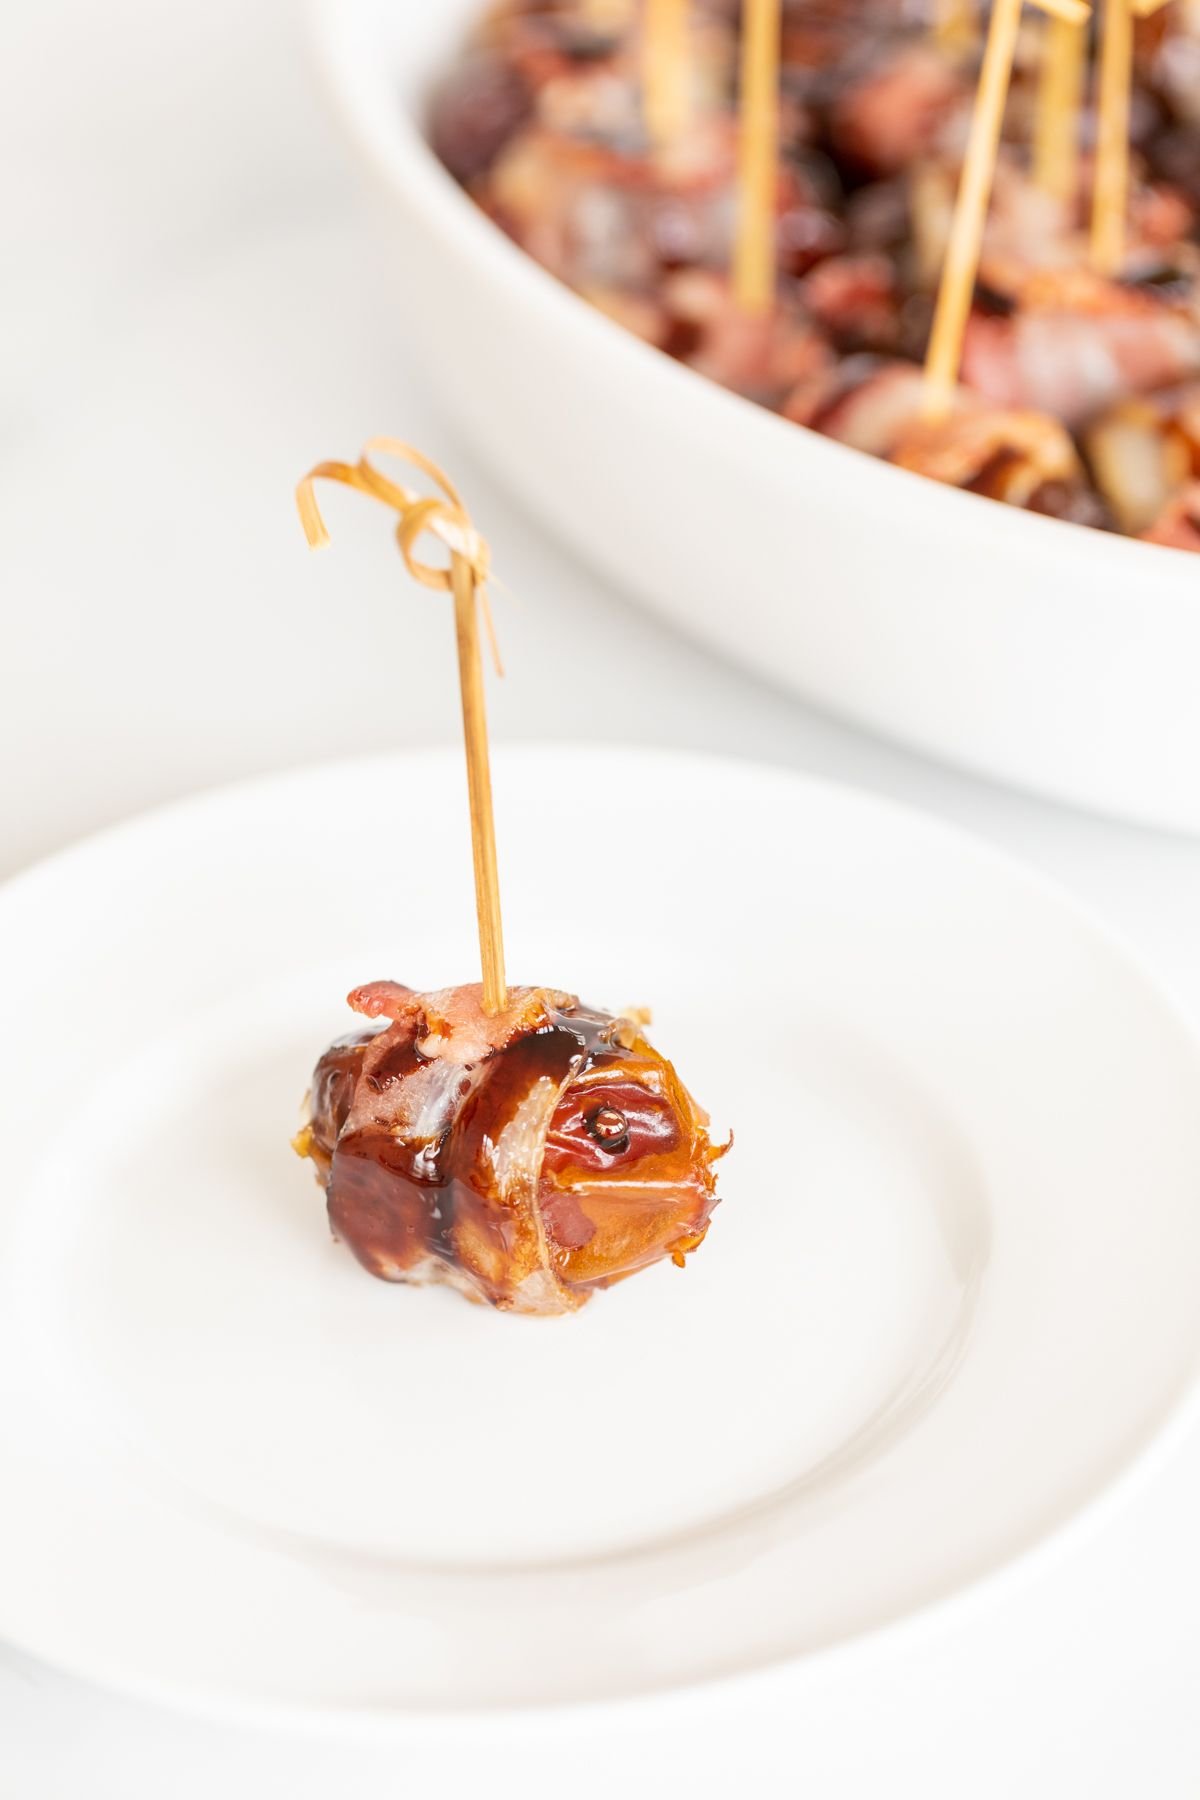 A single stuffed date wrapped in bacon on a white plate, with a dish full of them in the background.